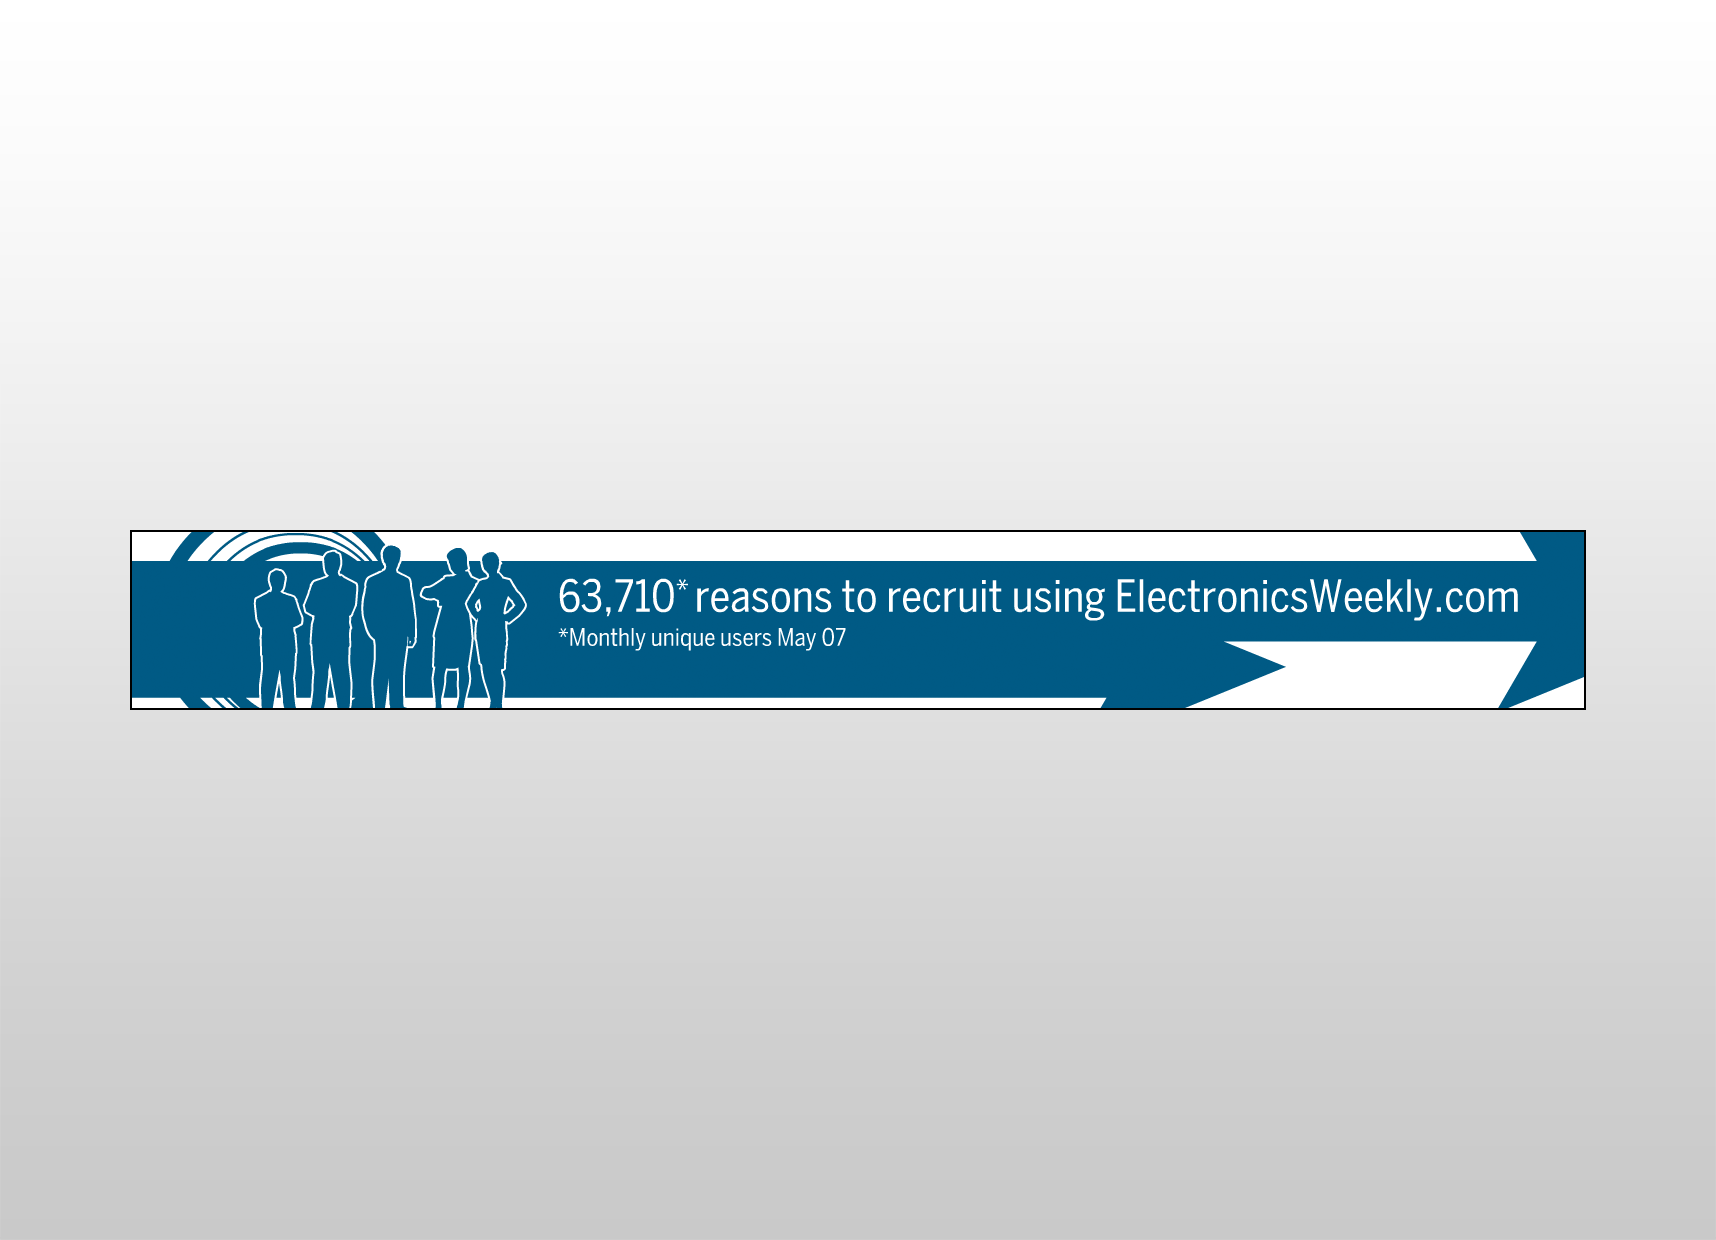 Electronics Weekly Recruitment - Recruiters Leaderboard